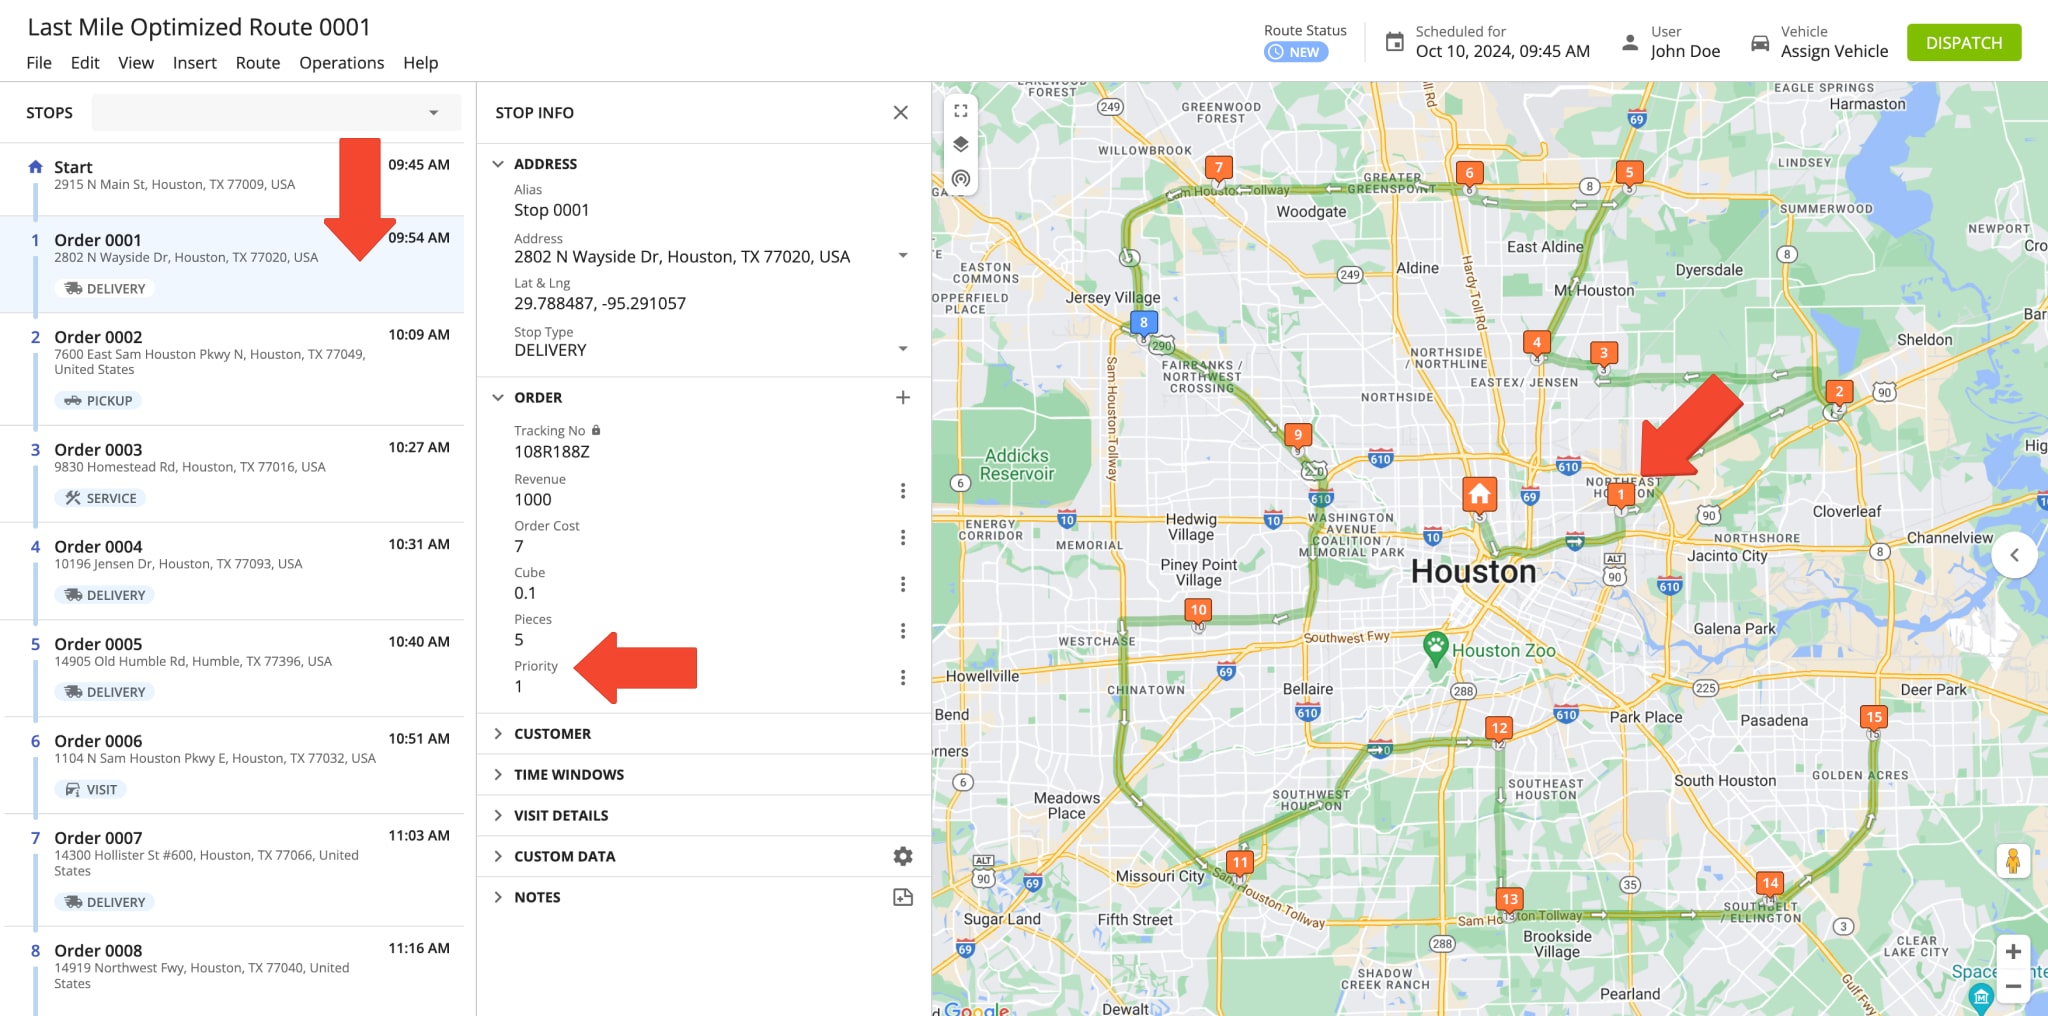 Planned and optimized route with prioritized orders for last mile delivery, service, visits, etc.